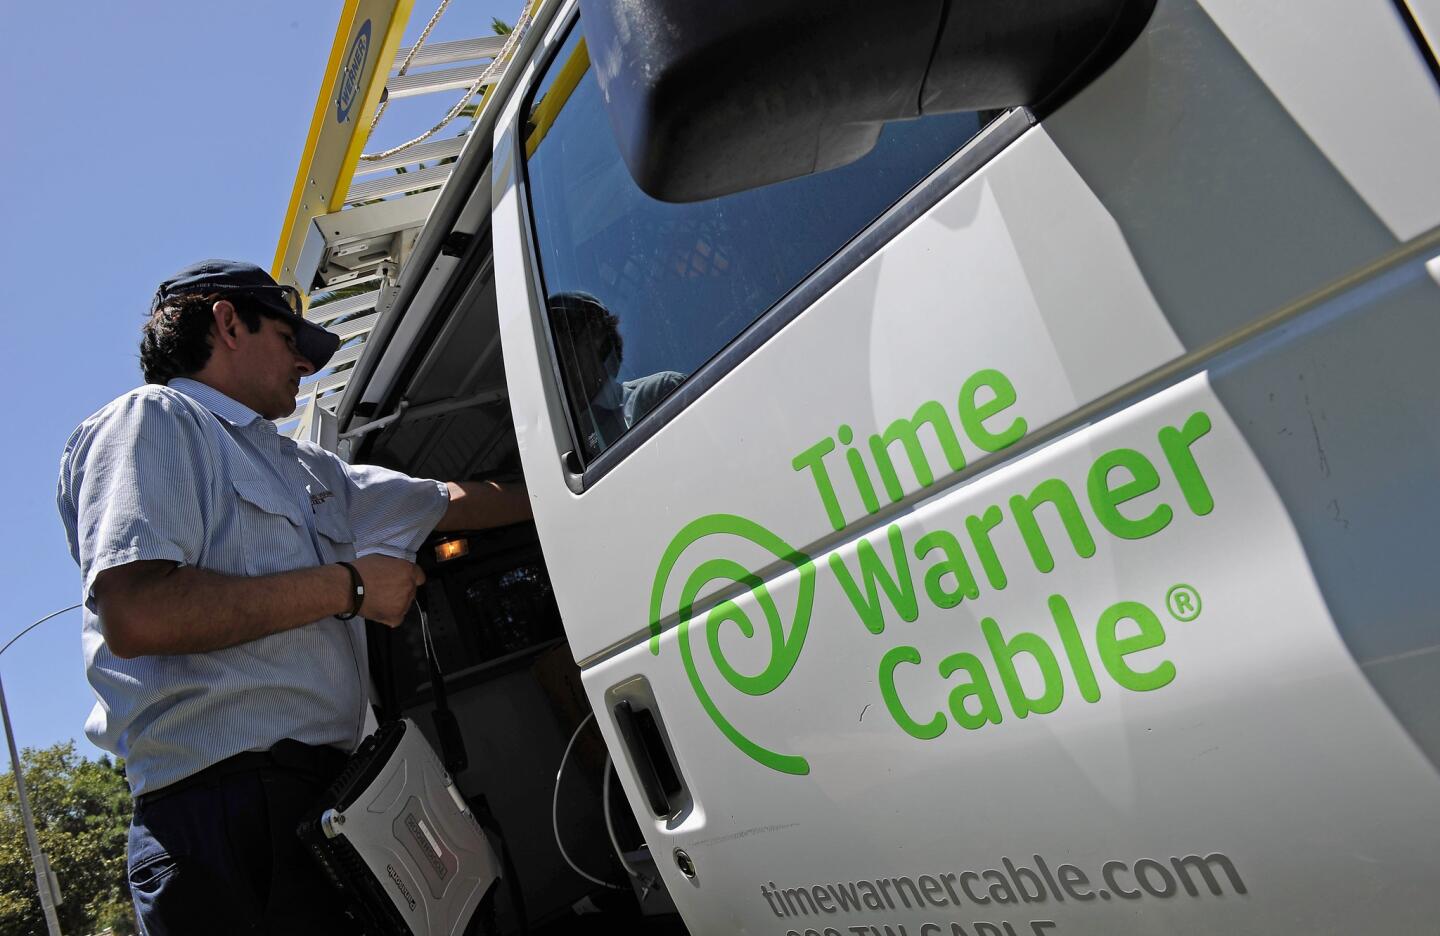 6. Charter Communications and Time Warner Cable